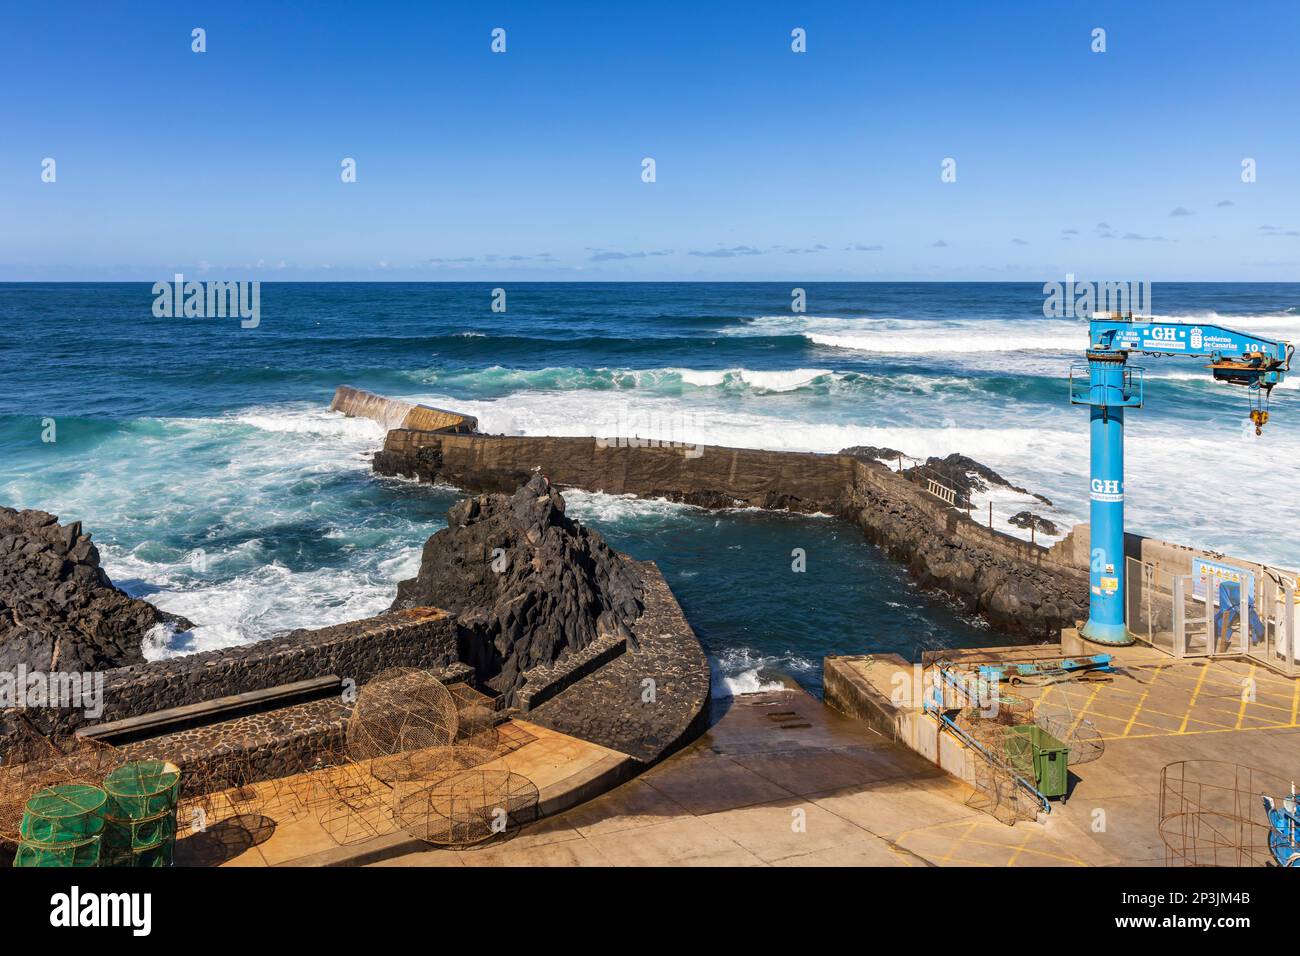 The small harbour and fishing port of Punta del Hidalgo in Tenerife, Canary Islands. Stock Photo